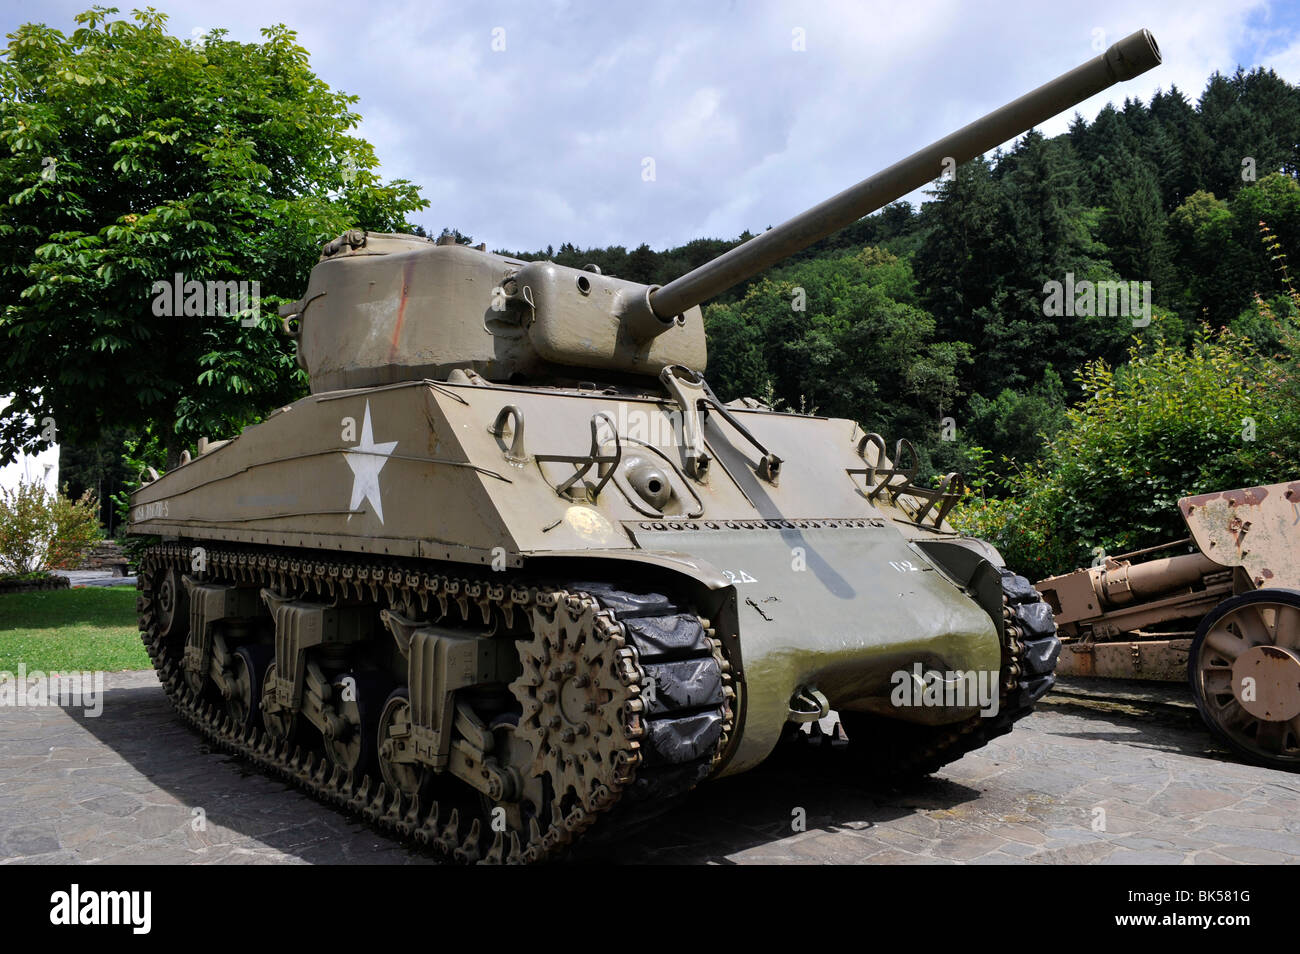 US Sherman Tank M4A3 of the 9th Armored Division, on display at Clervaux, Luxembourg, EU Stock Photo